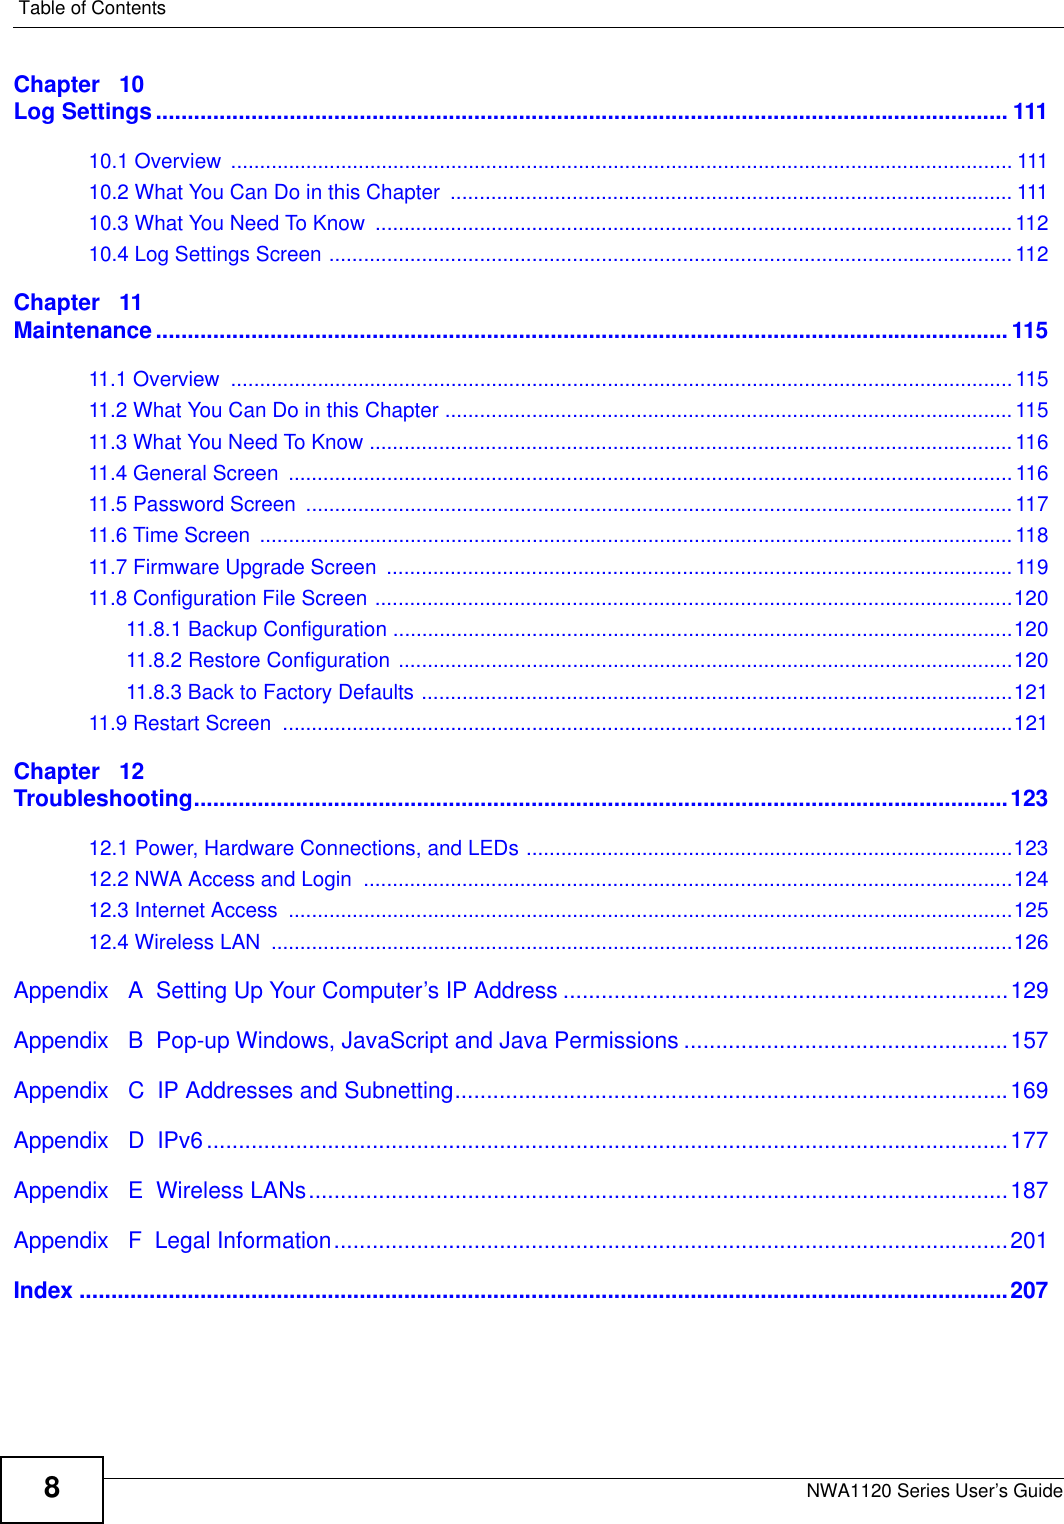 Table of ContentsNWA1120 Series User’s Guide8Chapter   10Log Settings...................................................................................................................................... 11110.1 Overview  ....................................................................................................................................... 11110.2 What You Can Do in this Chapter  ................................................................................................. 11110.3 What You Need To Know  .............................................................................................................. 11210.4 Log Settings Screen ...................................................................................................................... 112Chapter   11Maintenance......................................................................................................................................11511.1 Overview  .......................................................................................................................................11511.2 What You Can Do in this Chapter ..................................................................................................11511.3 What You Need To Know ............................................................................................................... 11611.4 General Screen  .............................................................................................................................11611.5 Password Screen  .......................................................................................................................... 11711.6 Time Screen  .................................................................................................................................. 11811.7 Firmware Upgrade Screen  ............................................................................................................ 11911.8 Configuration File Screen ..............................................................................................................12011.8.1 Backup Configuration ...........................................................................................................12011.8.2 Restore Configuration ..........................................................................................................12011.8.3 Back to Factory Defaults ......................................................................................................12111.9 Restart Screen  ..............................................................................................................................121Chapter   12Troubleshooting................................................................................................................................12312.1 Power, Hardware Connections, and LEDs ....................................................................................12312.2 NWA Access and Login  ................................................................................................................12412.3 Internet Access  .............................................................................................................................12512.4 Wireless LAN  ................................................................................................................................126Appendix   A  Setting Up Your Computer’s IP Address ......................................................................129Appendix   B  Pop-up Windows, JavaScript and Java Permissions ...................................................157Appendix   C  IP Addresses and Subnetting.......................................................................................169Appendix   D  IPv6..............................................................................................................................177Appendix   E  Wireless LANs..............................................................................................................187Appendix   F  Legal Information..........................................................................................................201Index ..................................................................................................................................................207